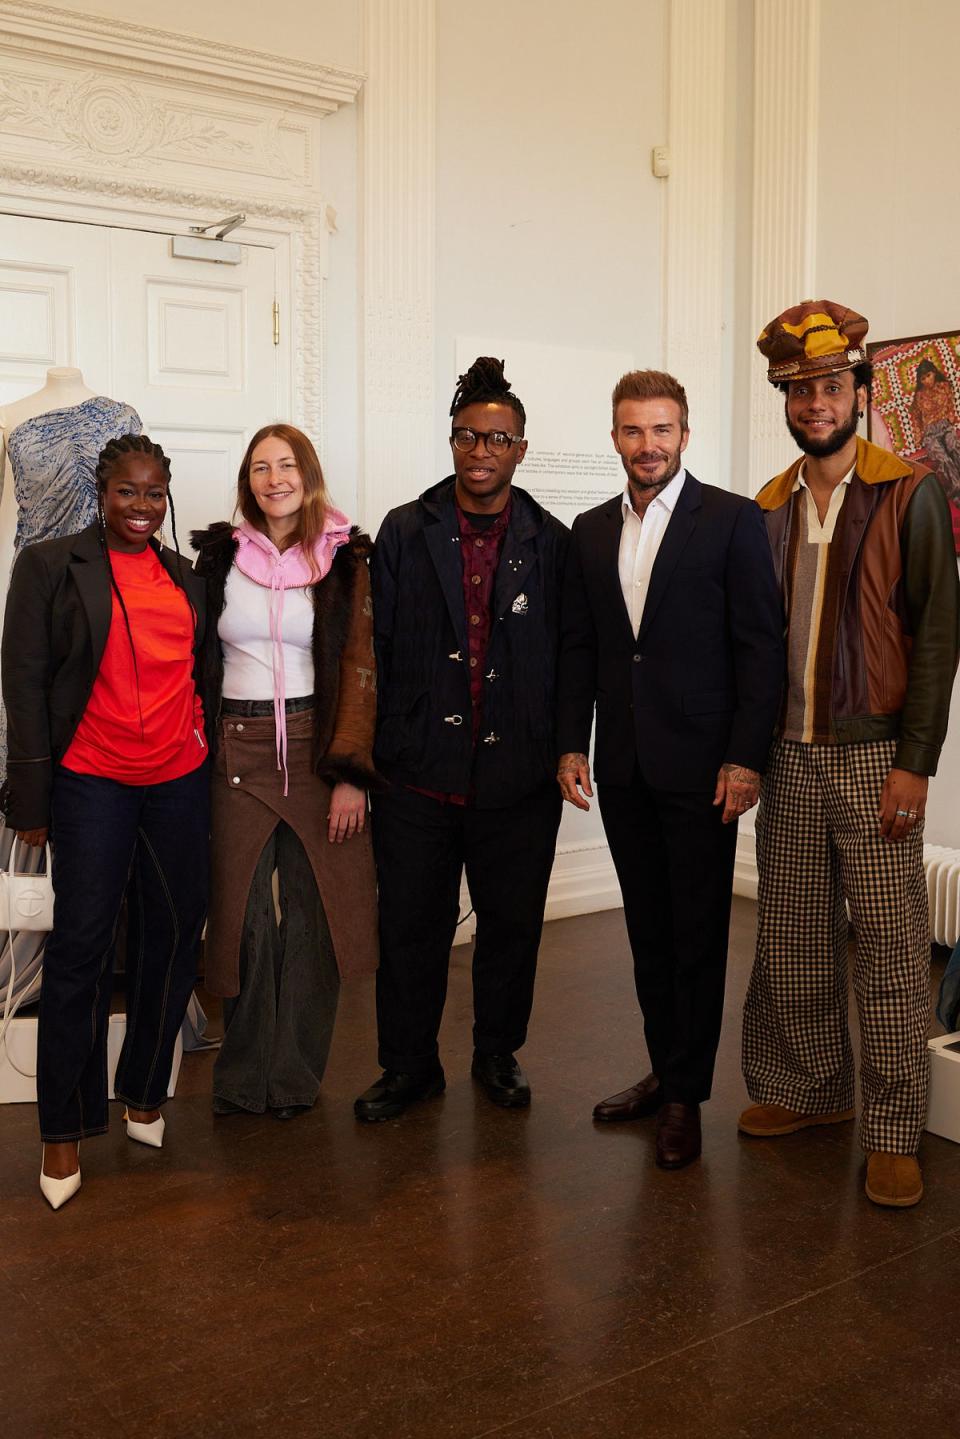 Clara Amfo, Marie Lueder, Foday Dumbuya, David Beckham and Nicholas Daley at the launch of London Fashion Week Men’s on Friday (Genevieve Leah)